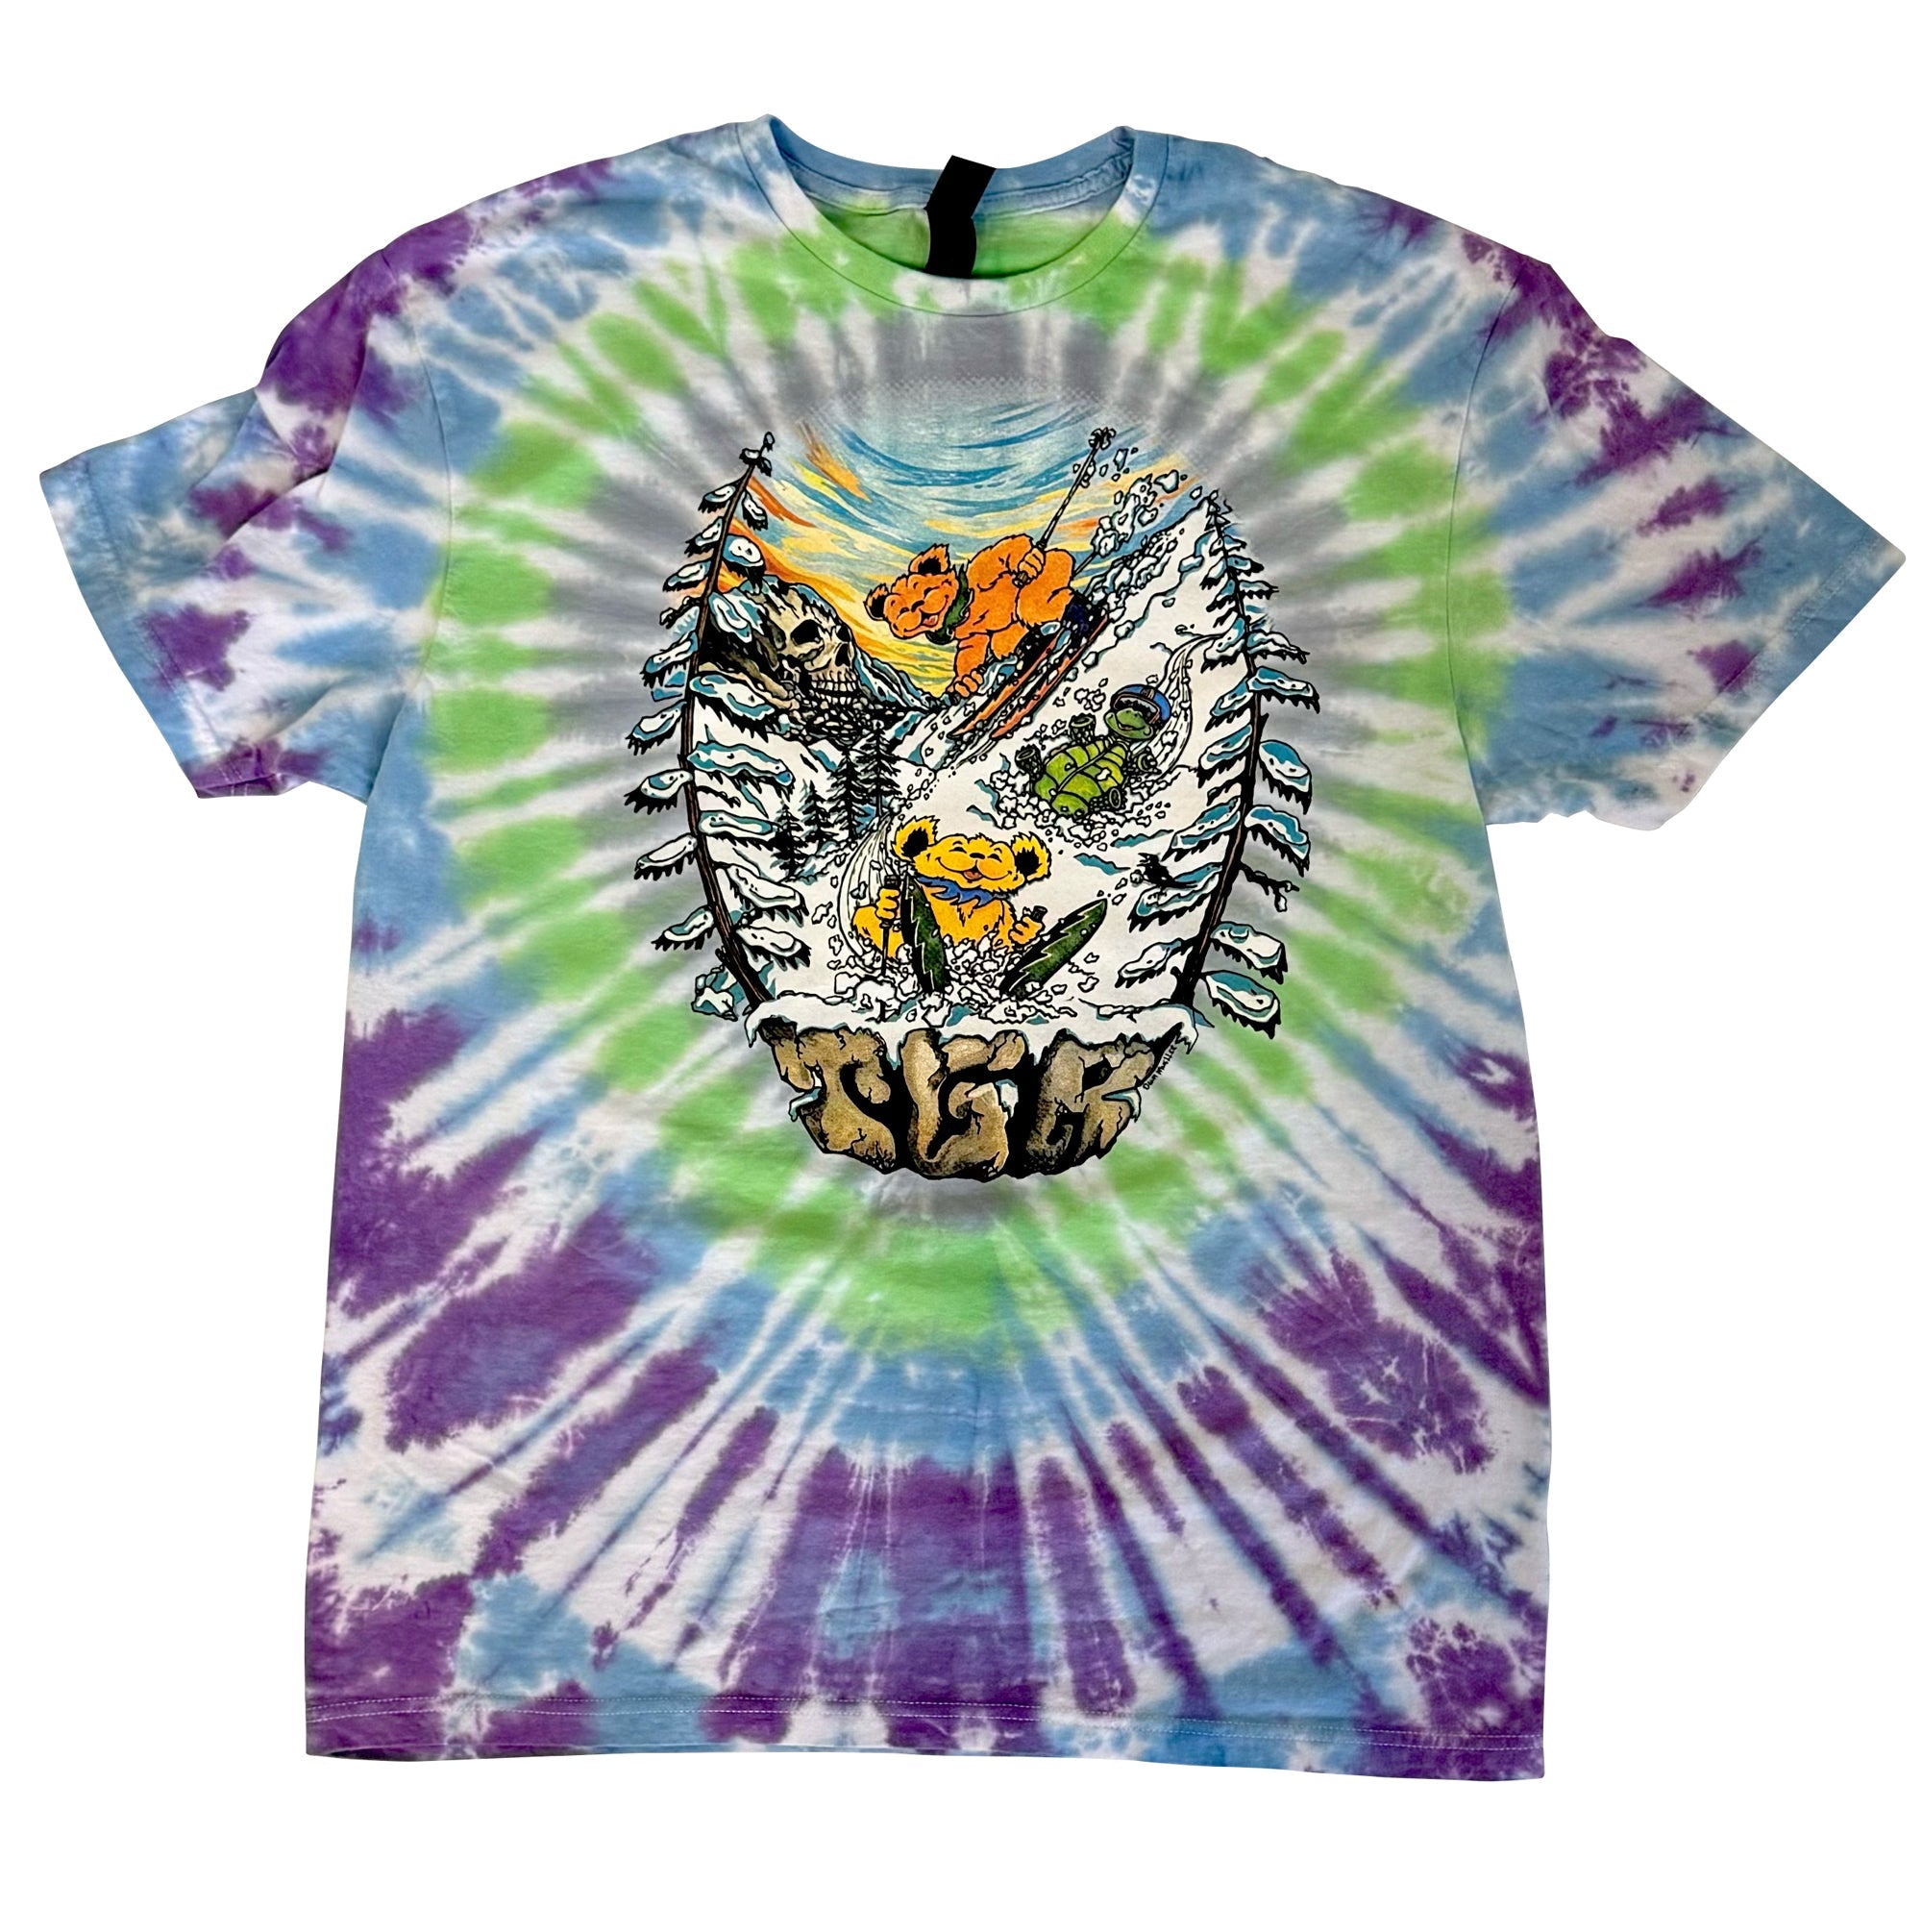 FRONT: Blue, Green, Purple, and Grey circle tie dye short sleeve tee. Artwork is alpenglow sky with two Grateful Dead Bears (1 orange, 1 yellow) skiing with a Terrapin Turtle sliding down the hill on it's back. The scene is bordered by two snow covered pine trees and has TGR stone lettering on bottom border. Grateful Dead Iconography is mixed into the scene with Bolt skis and Skull cliffs.